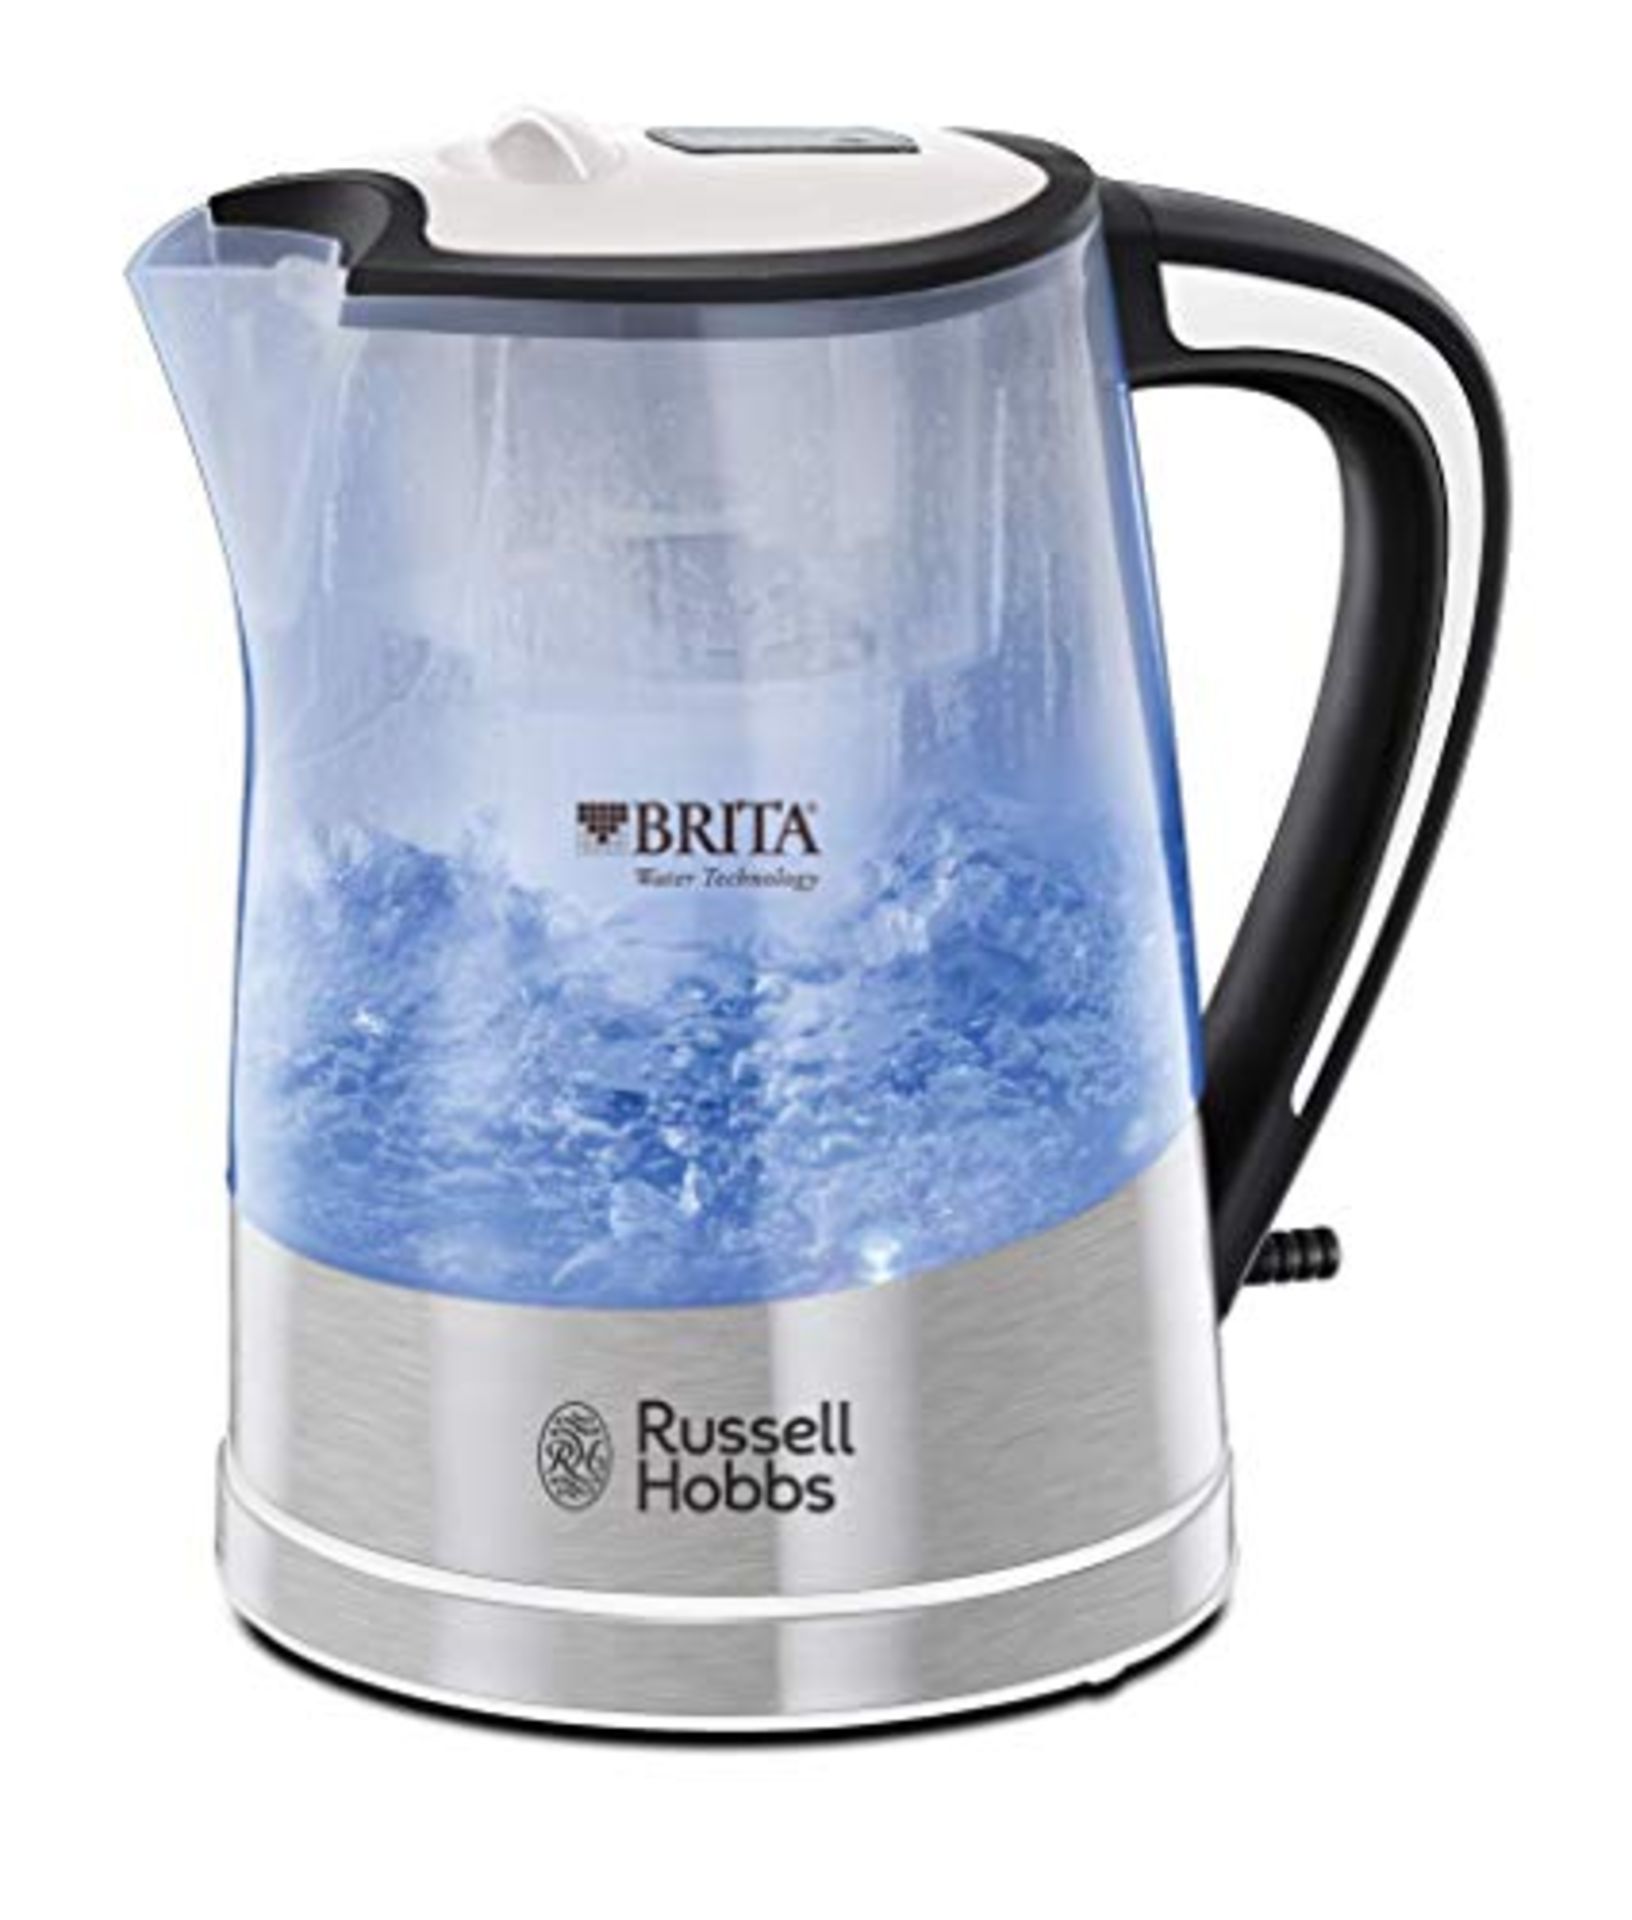 Russell Hobbs 22851 Brita Filter Purity Electric Kettle, Illuminating Filter Kettle wi